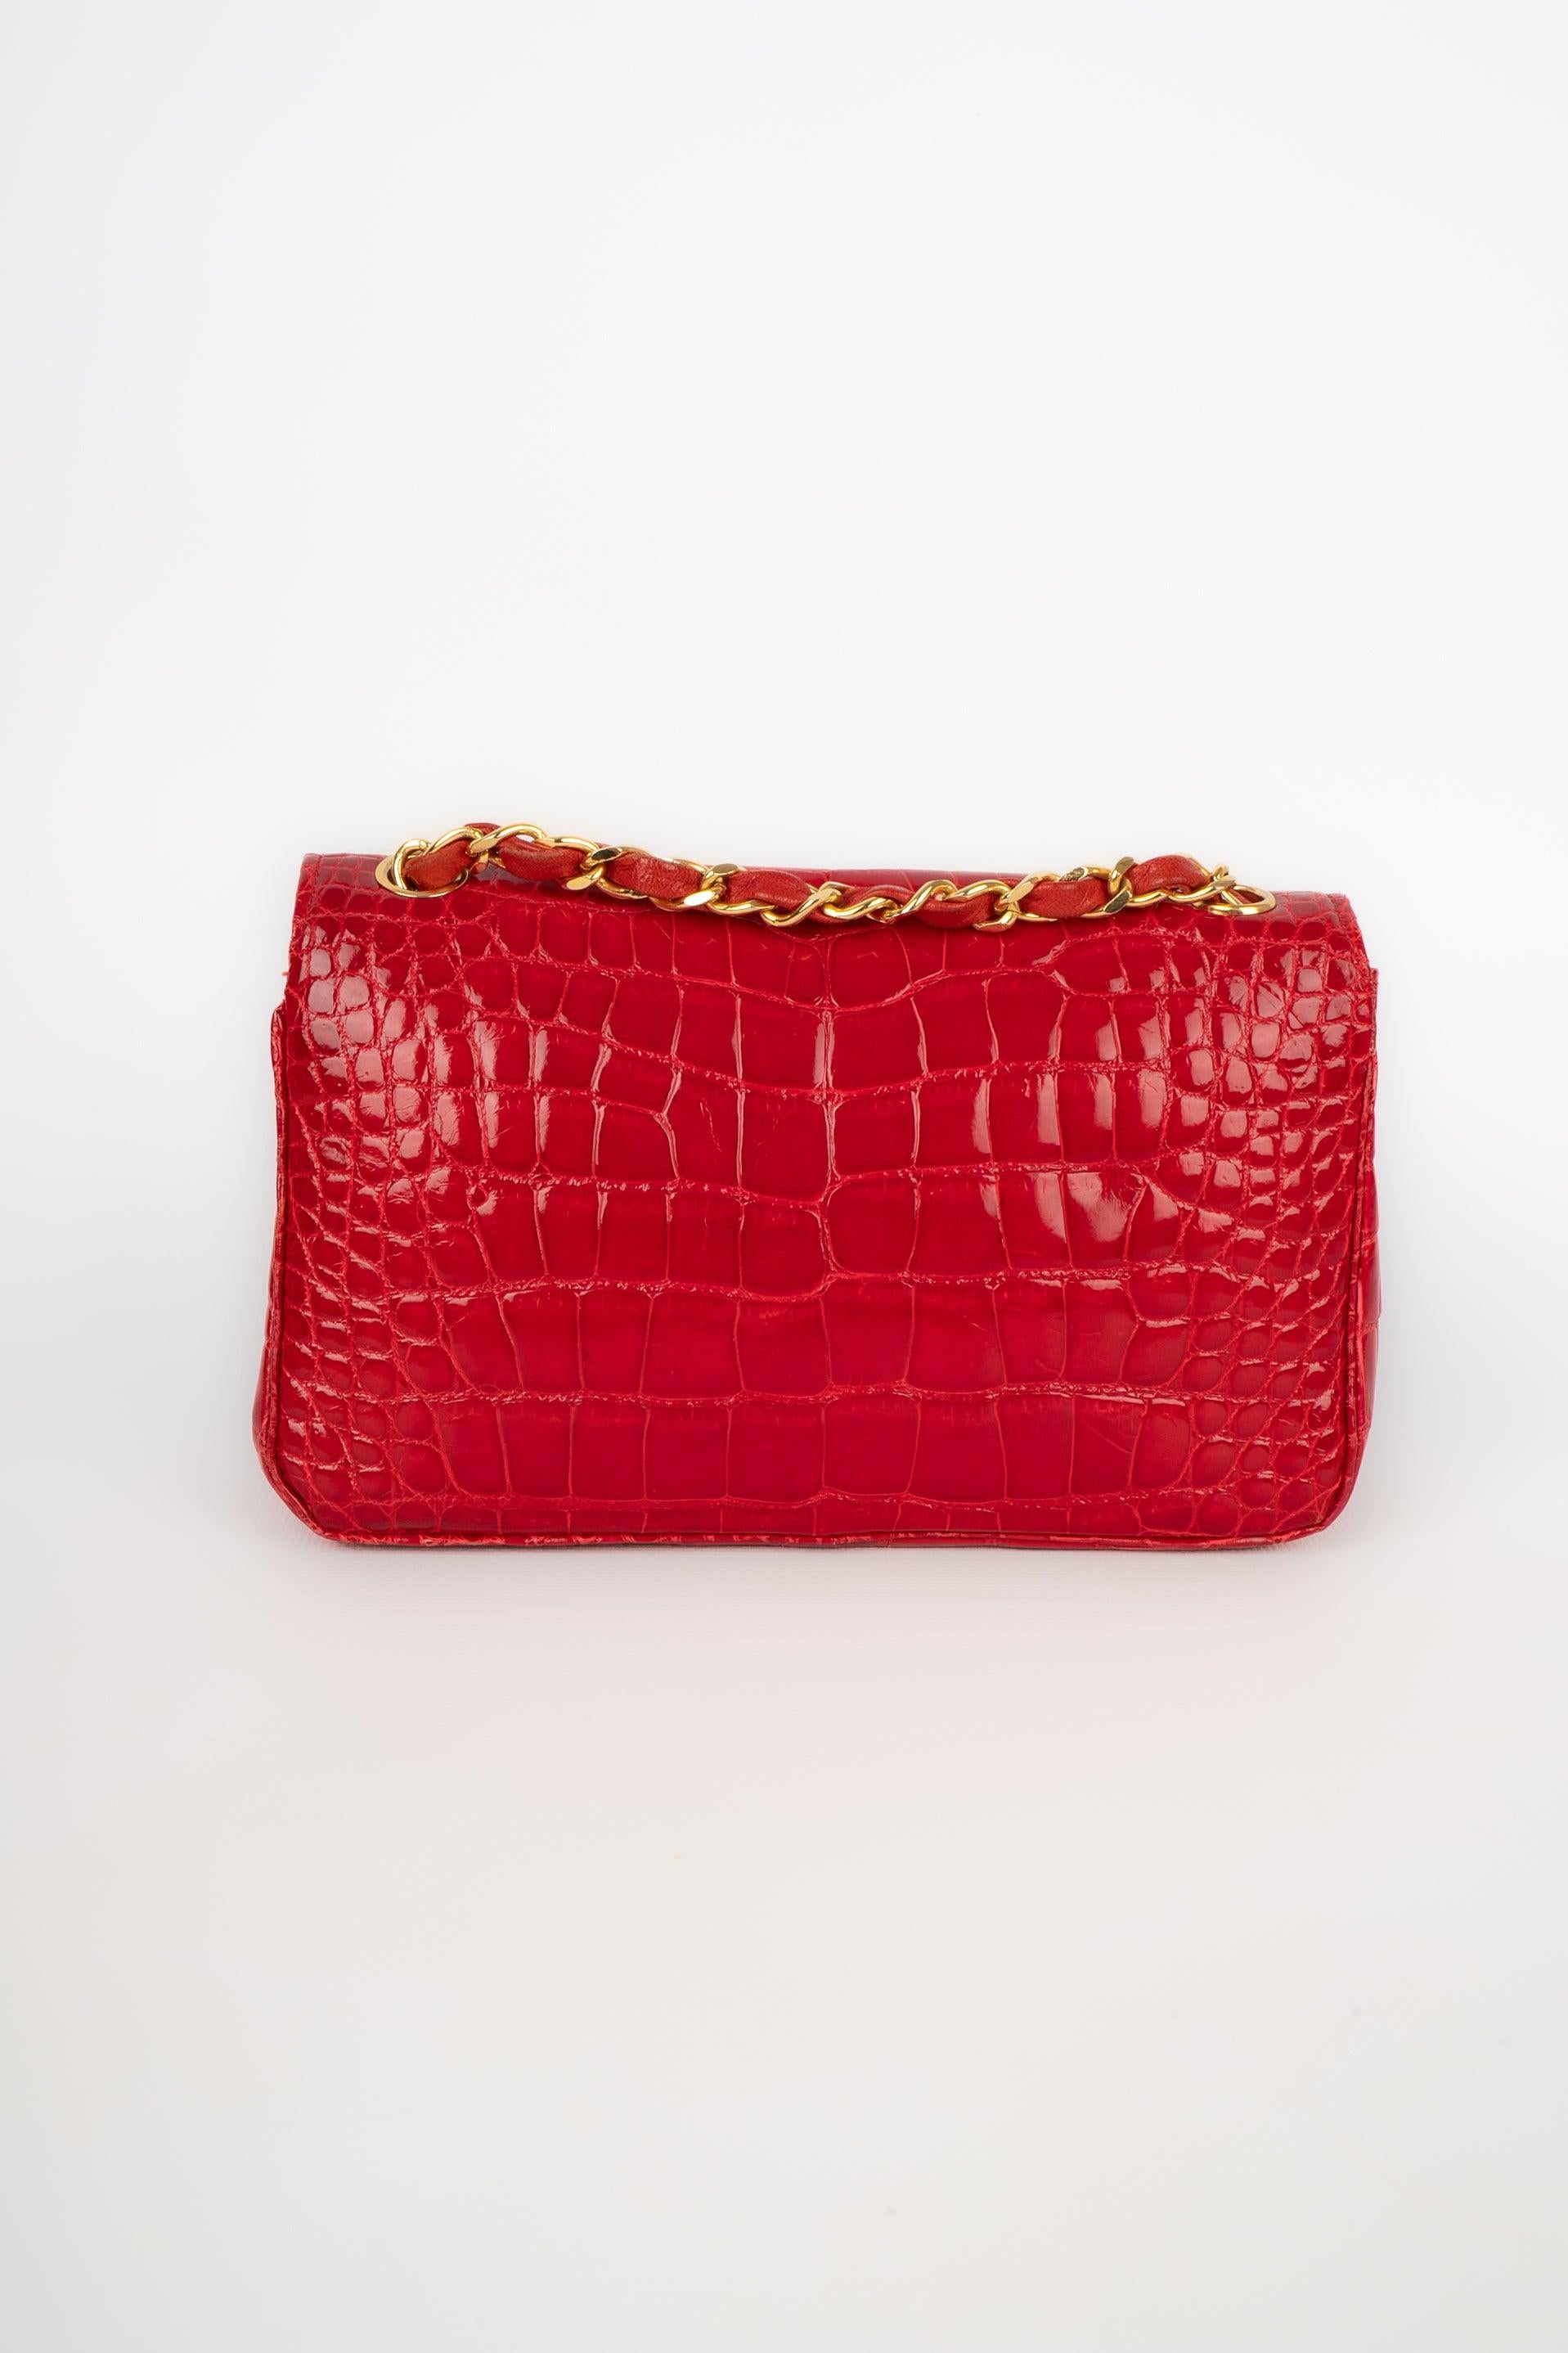 Women's Chanel Crocodile Leather Timeless Evening Bag